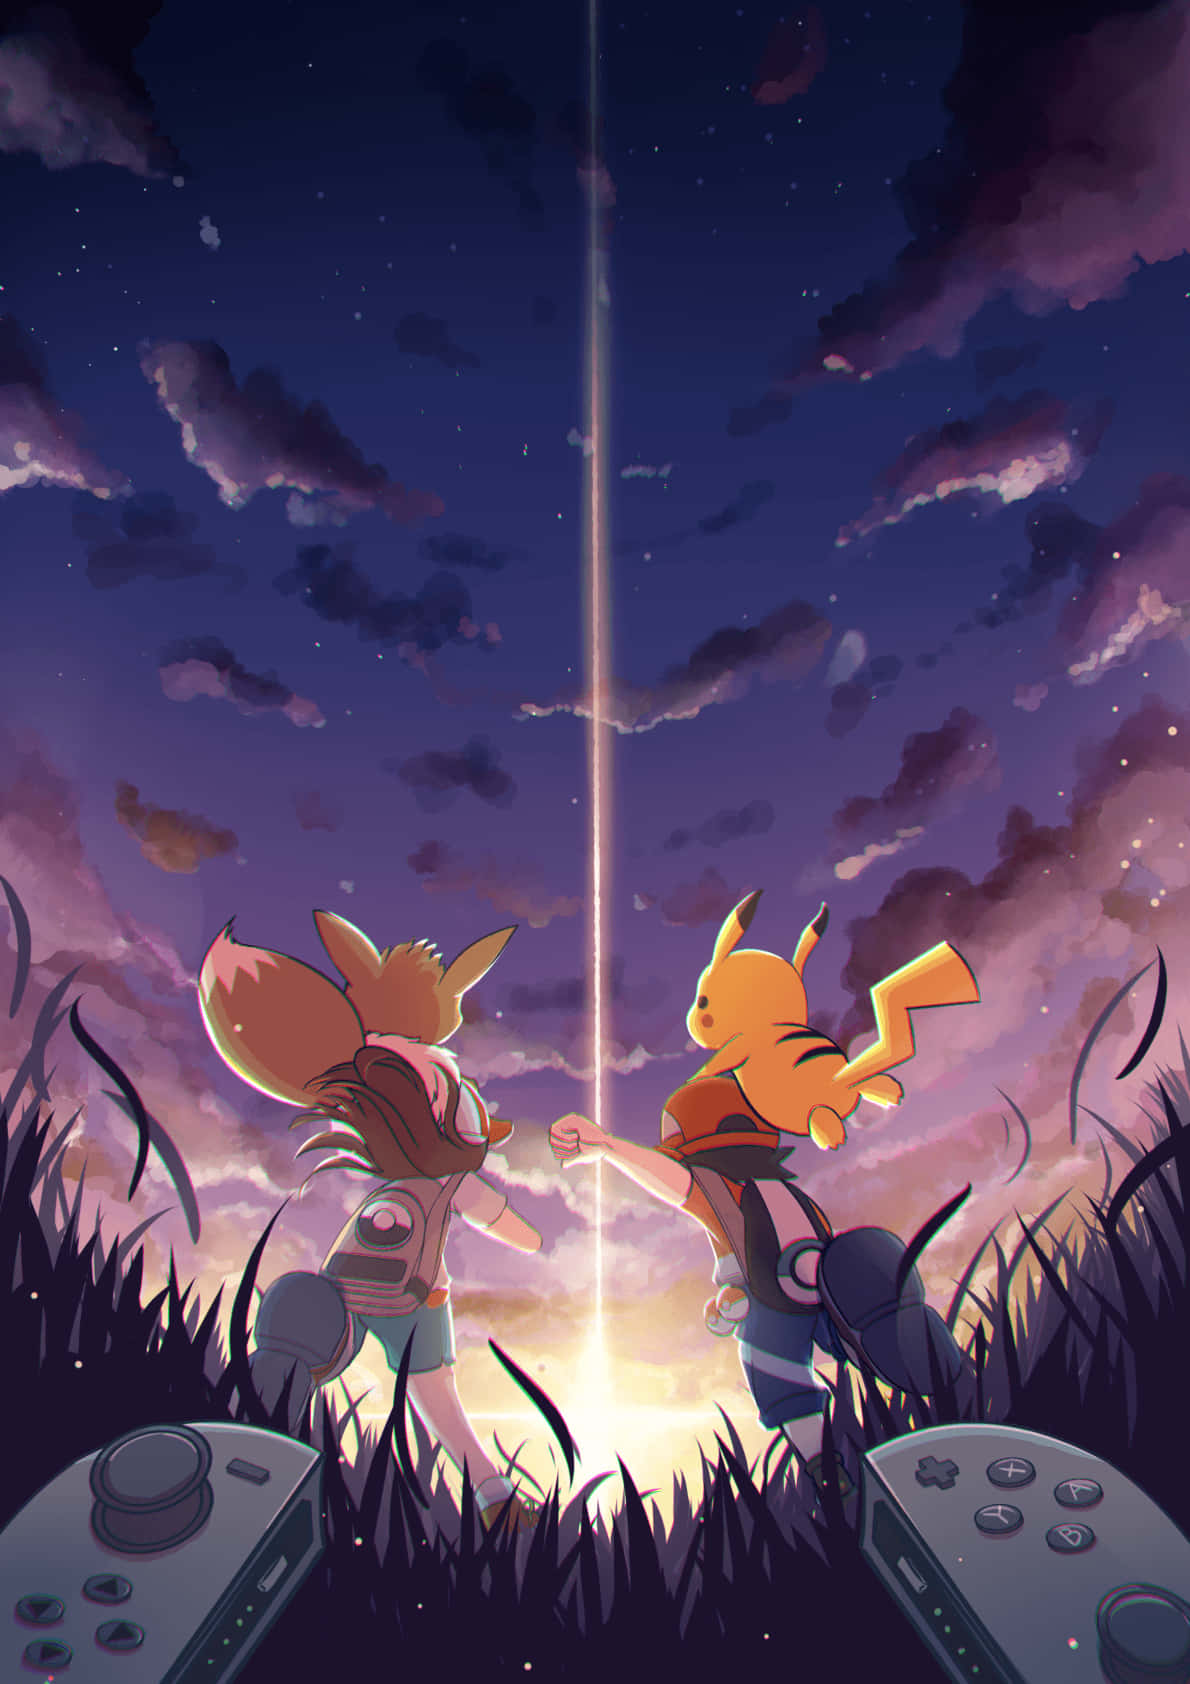 Awww, two of the cutest Pokemon buds hanging out together! Wallpaper